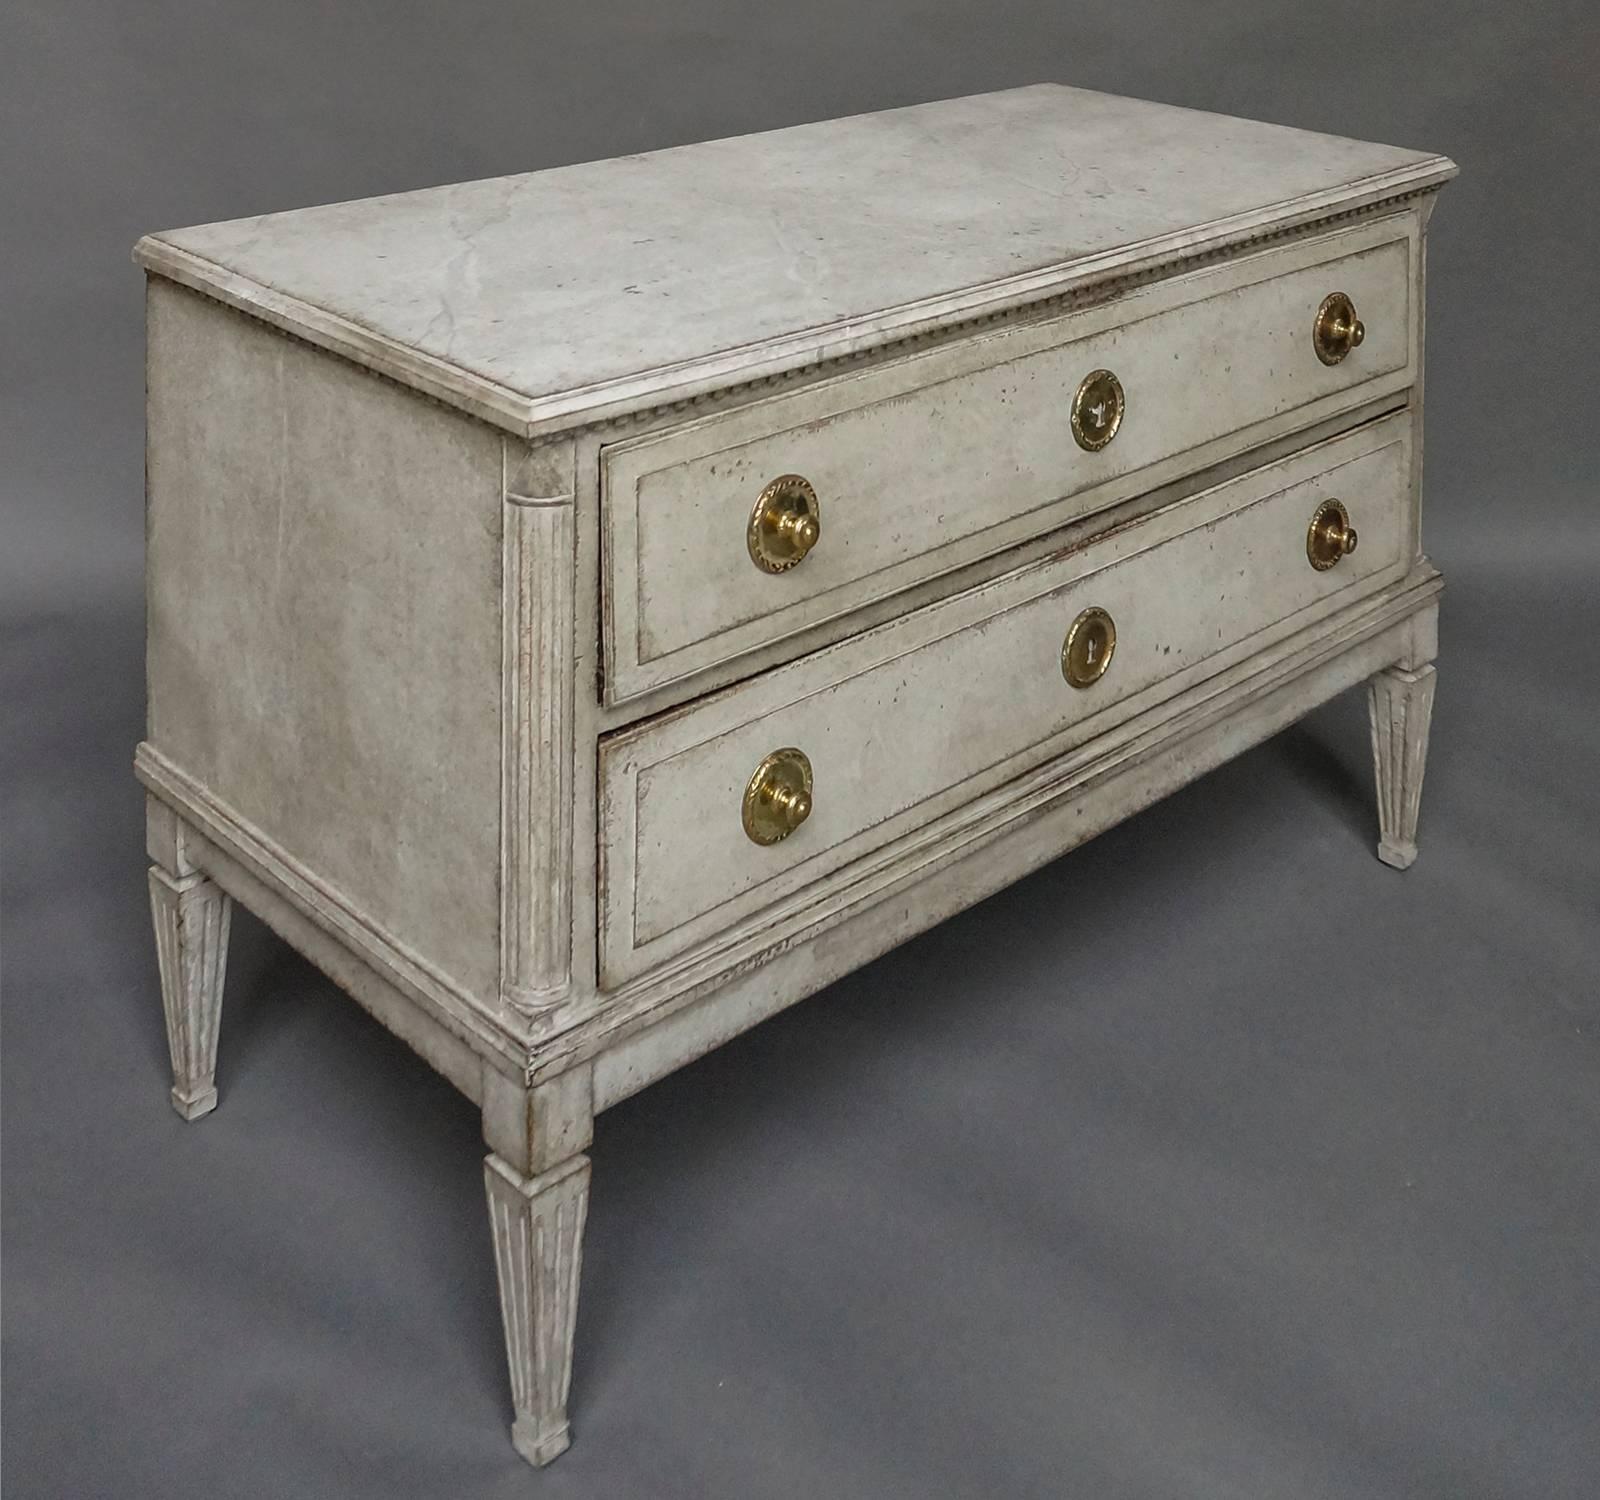 Swedish neoclassical two-drawer chest, circa 1780. Raised panels on the drawer fronts and original brass hardware. Dentil molding under the shaped top, quarter round columns at the front corners and tapering square legs.